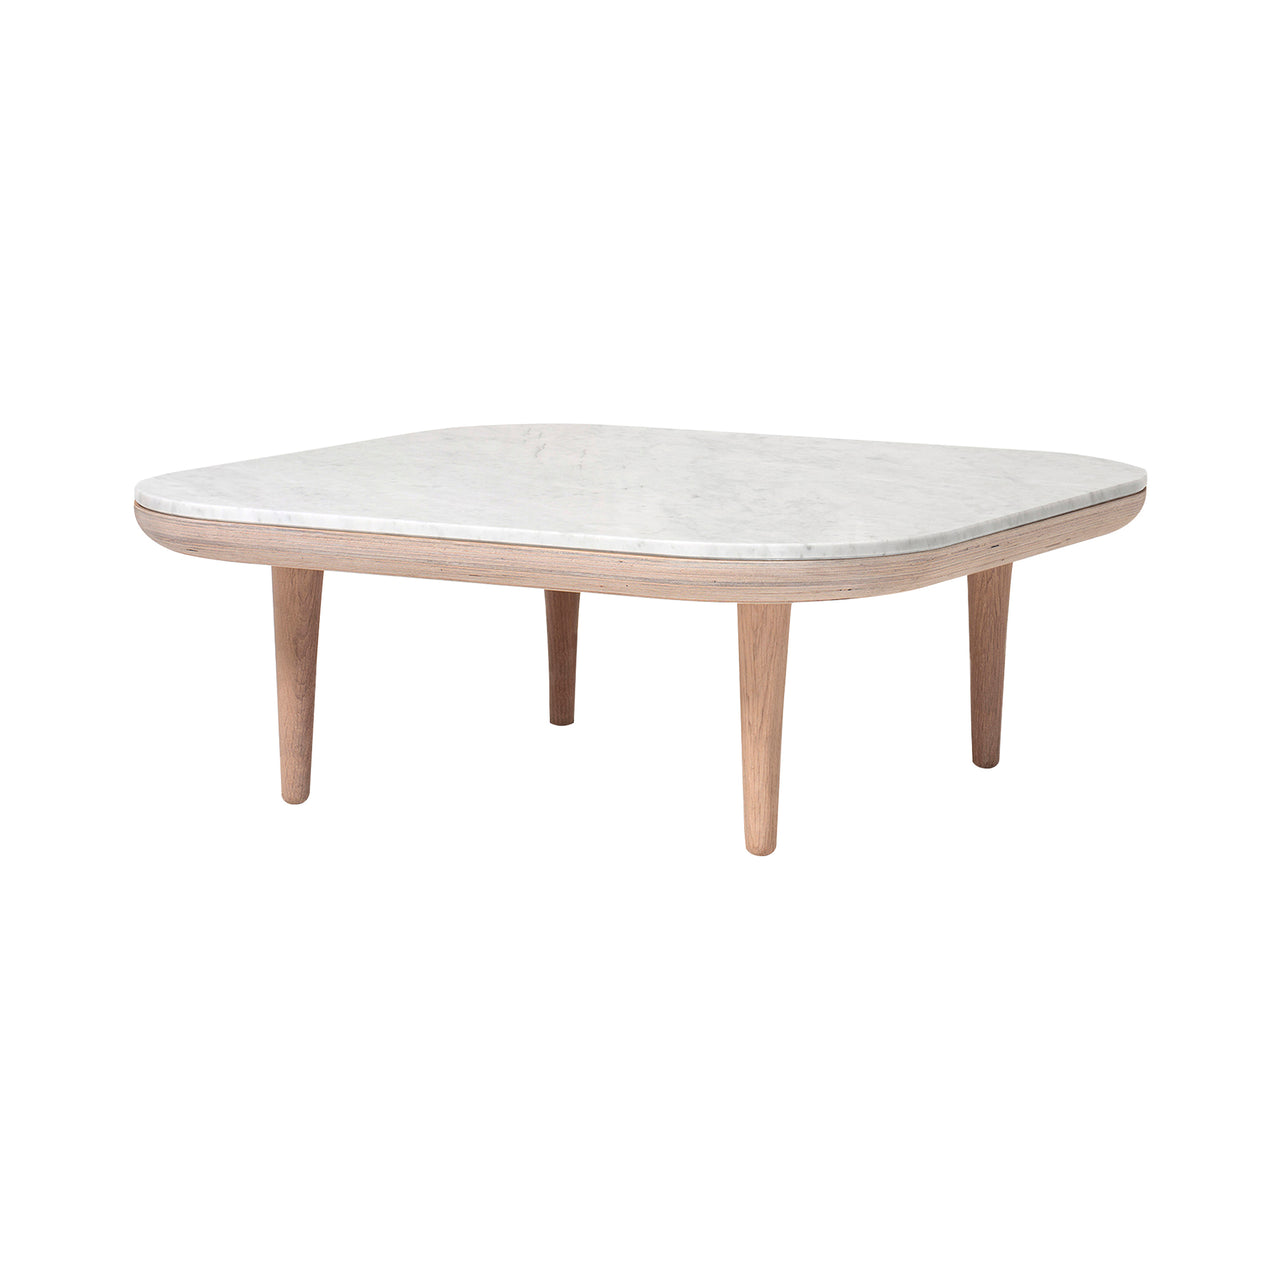 Fly Series SC4 Coffee or Side Table: Bianco Carrara Marble + White Oiled Oak